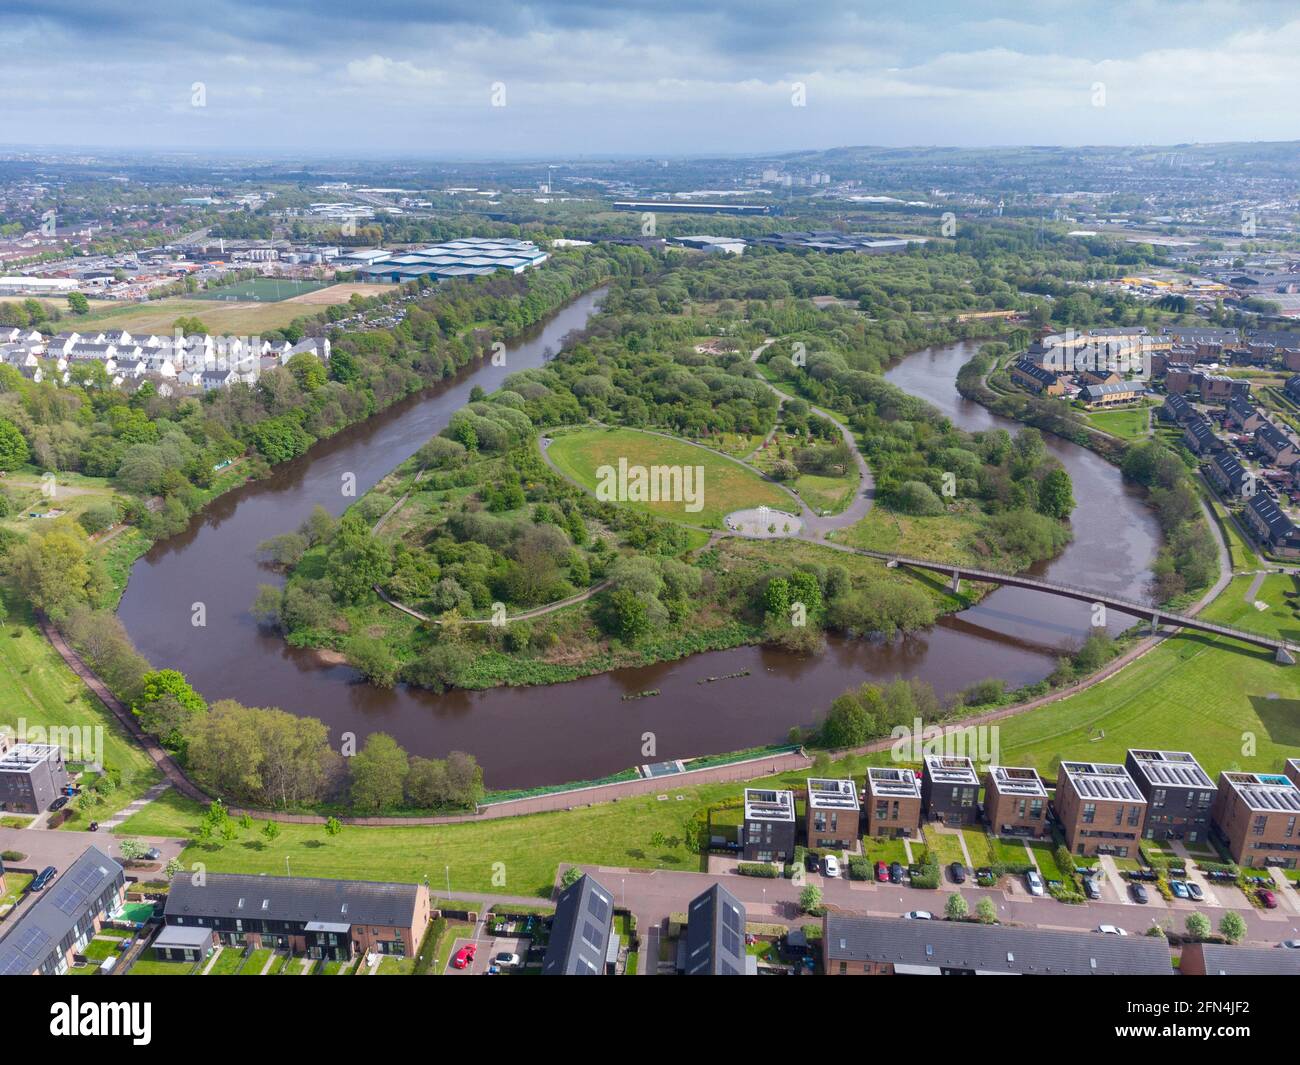 Aerial view of Cuningar Loop public woodland park on banks of River Clyde at Rutherglen, Glasgow, Scotland, UK Stock Photo